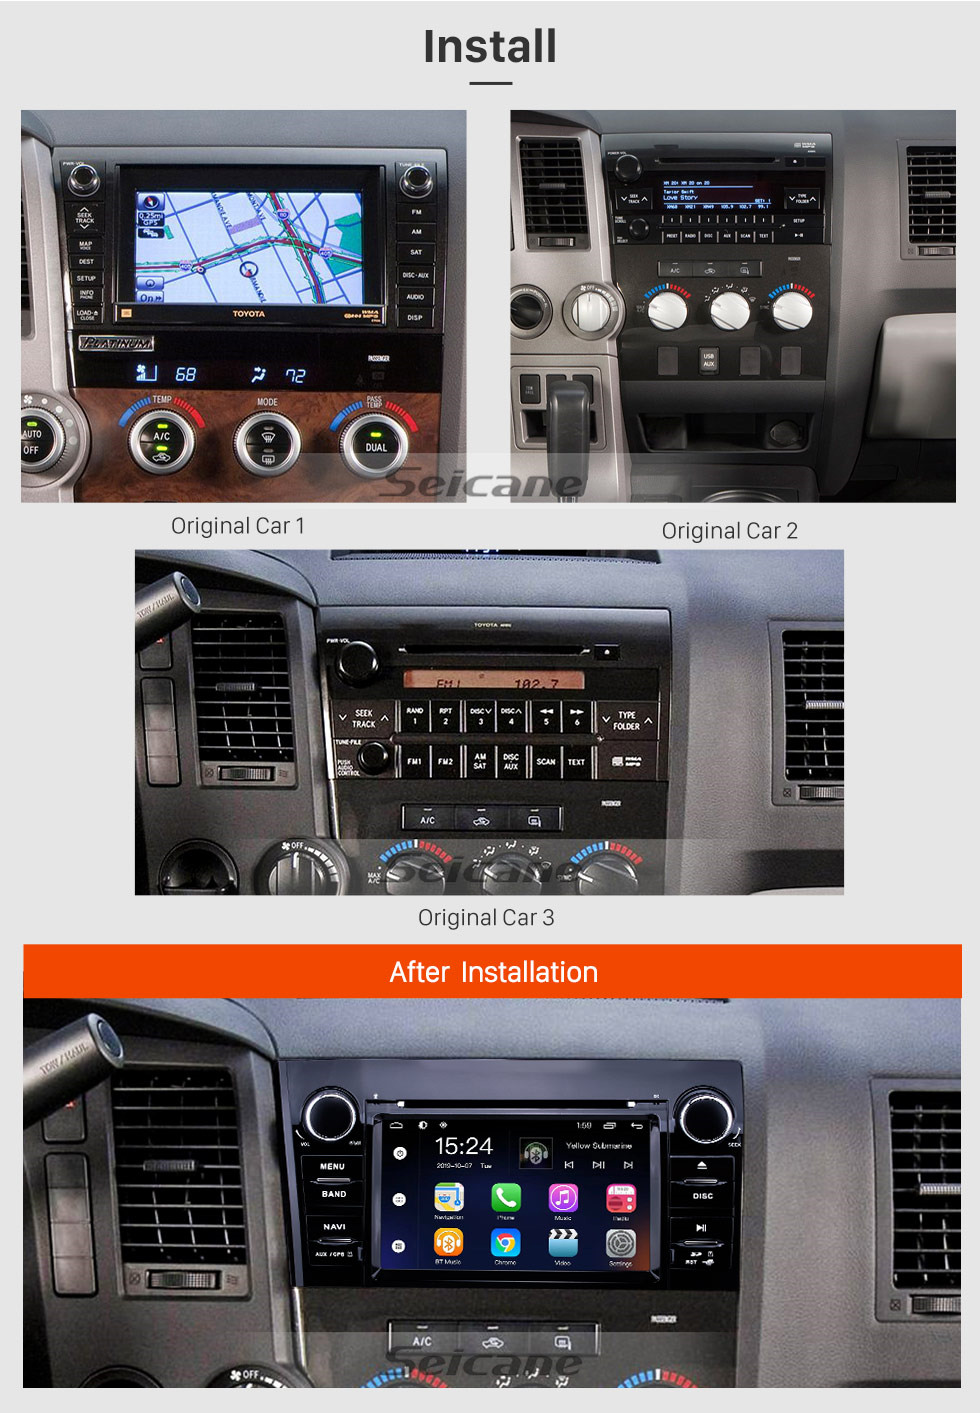 7 inch Android 9.0 Touchscreen GPS Navigation Radio for 2008-2015